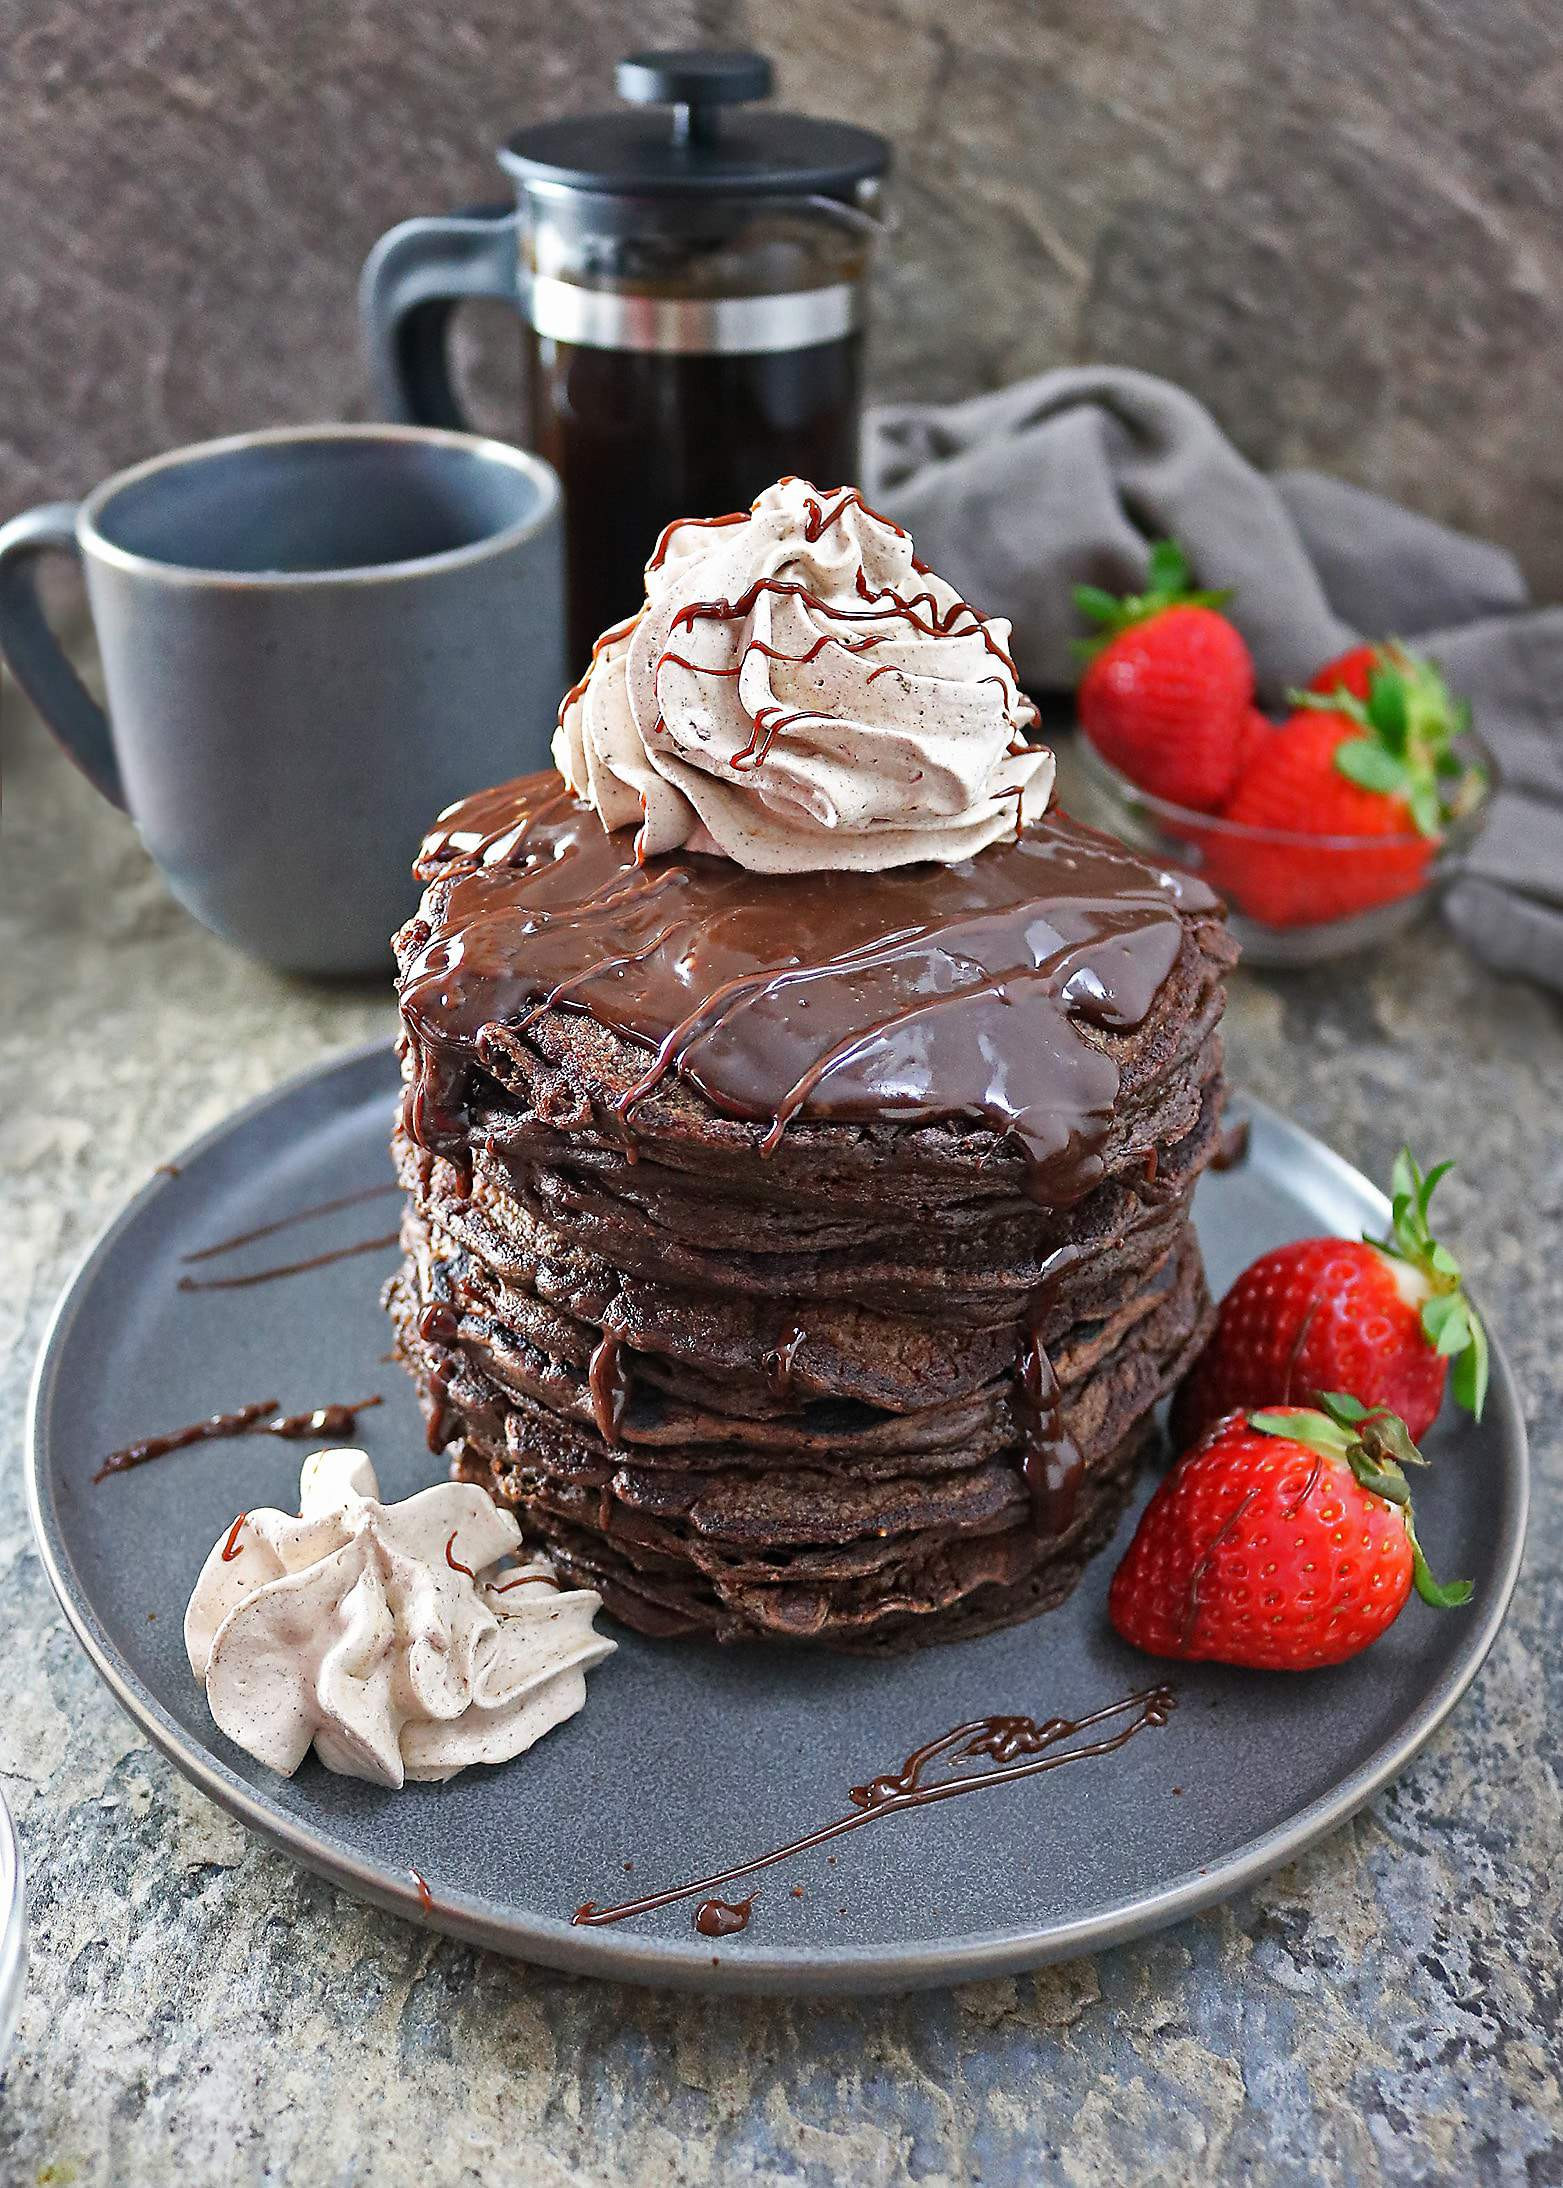 Pancakes With Chocolate Syrup
 Easy Chocolate Oatmeal Pancakes with Chocolate Sauce and